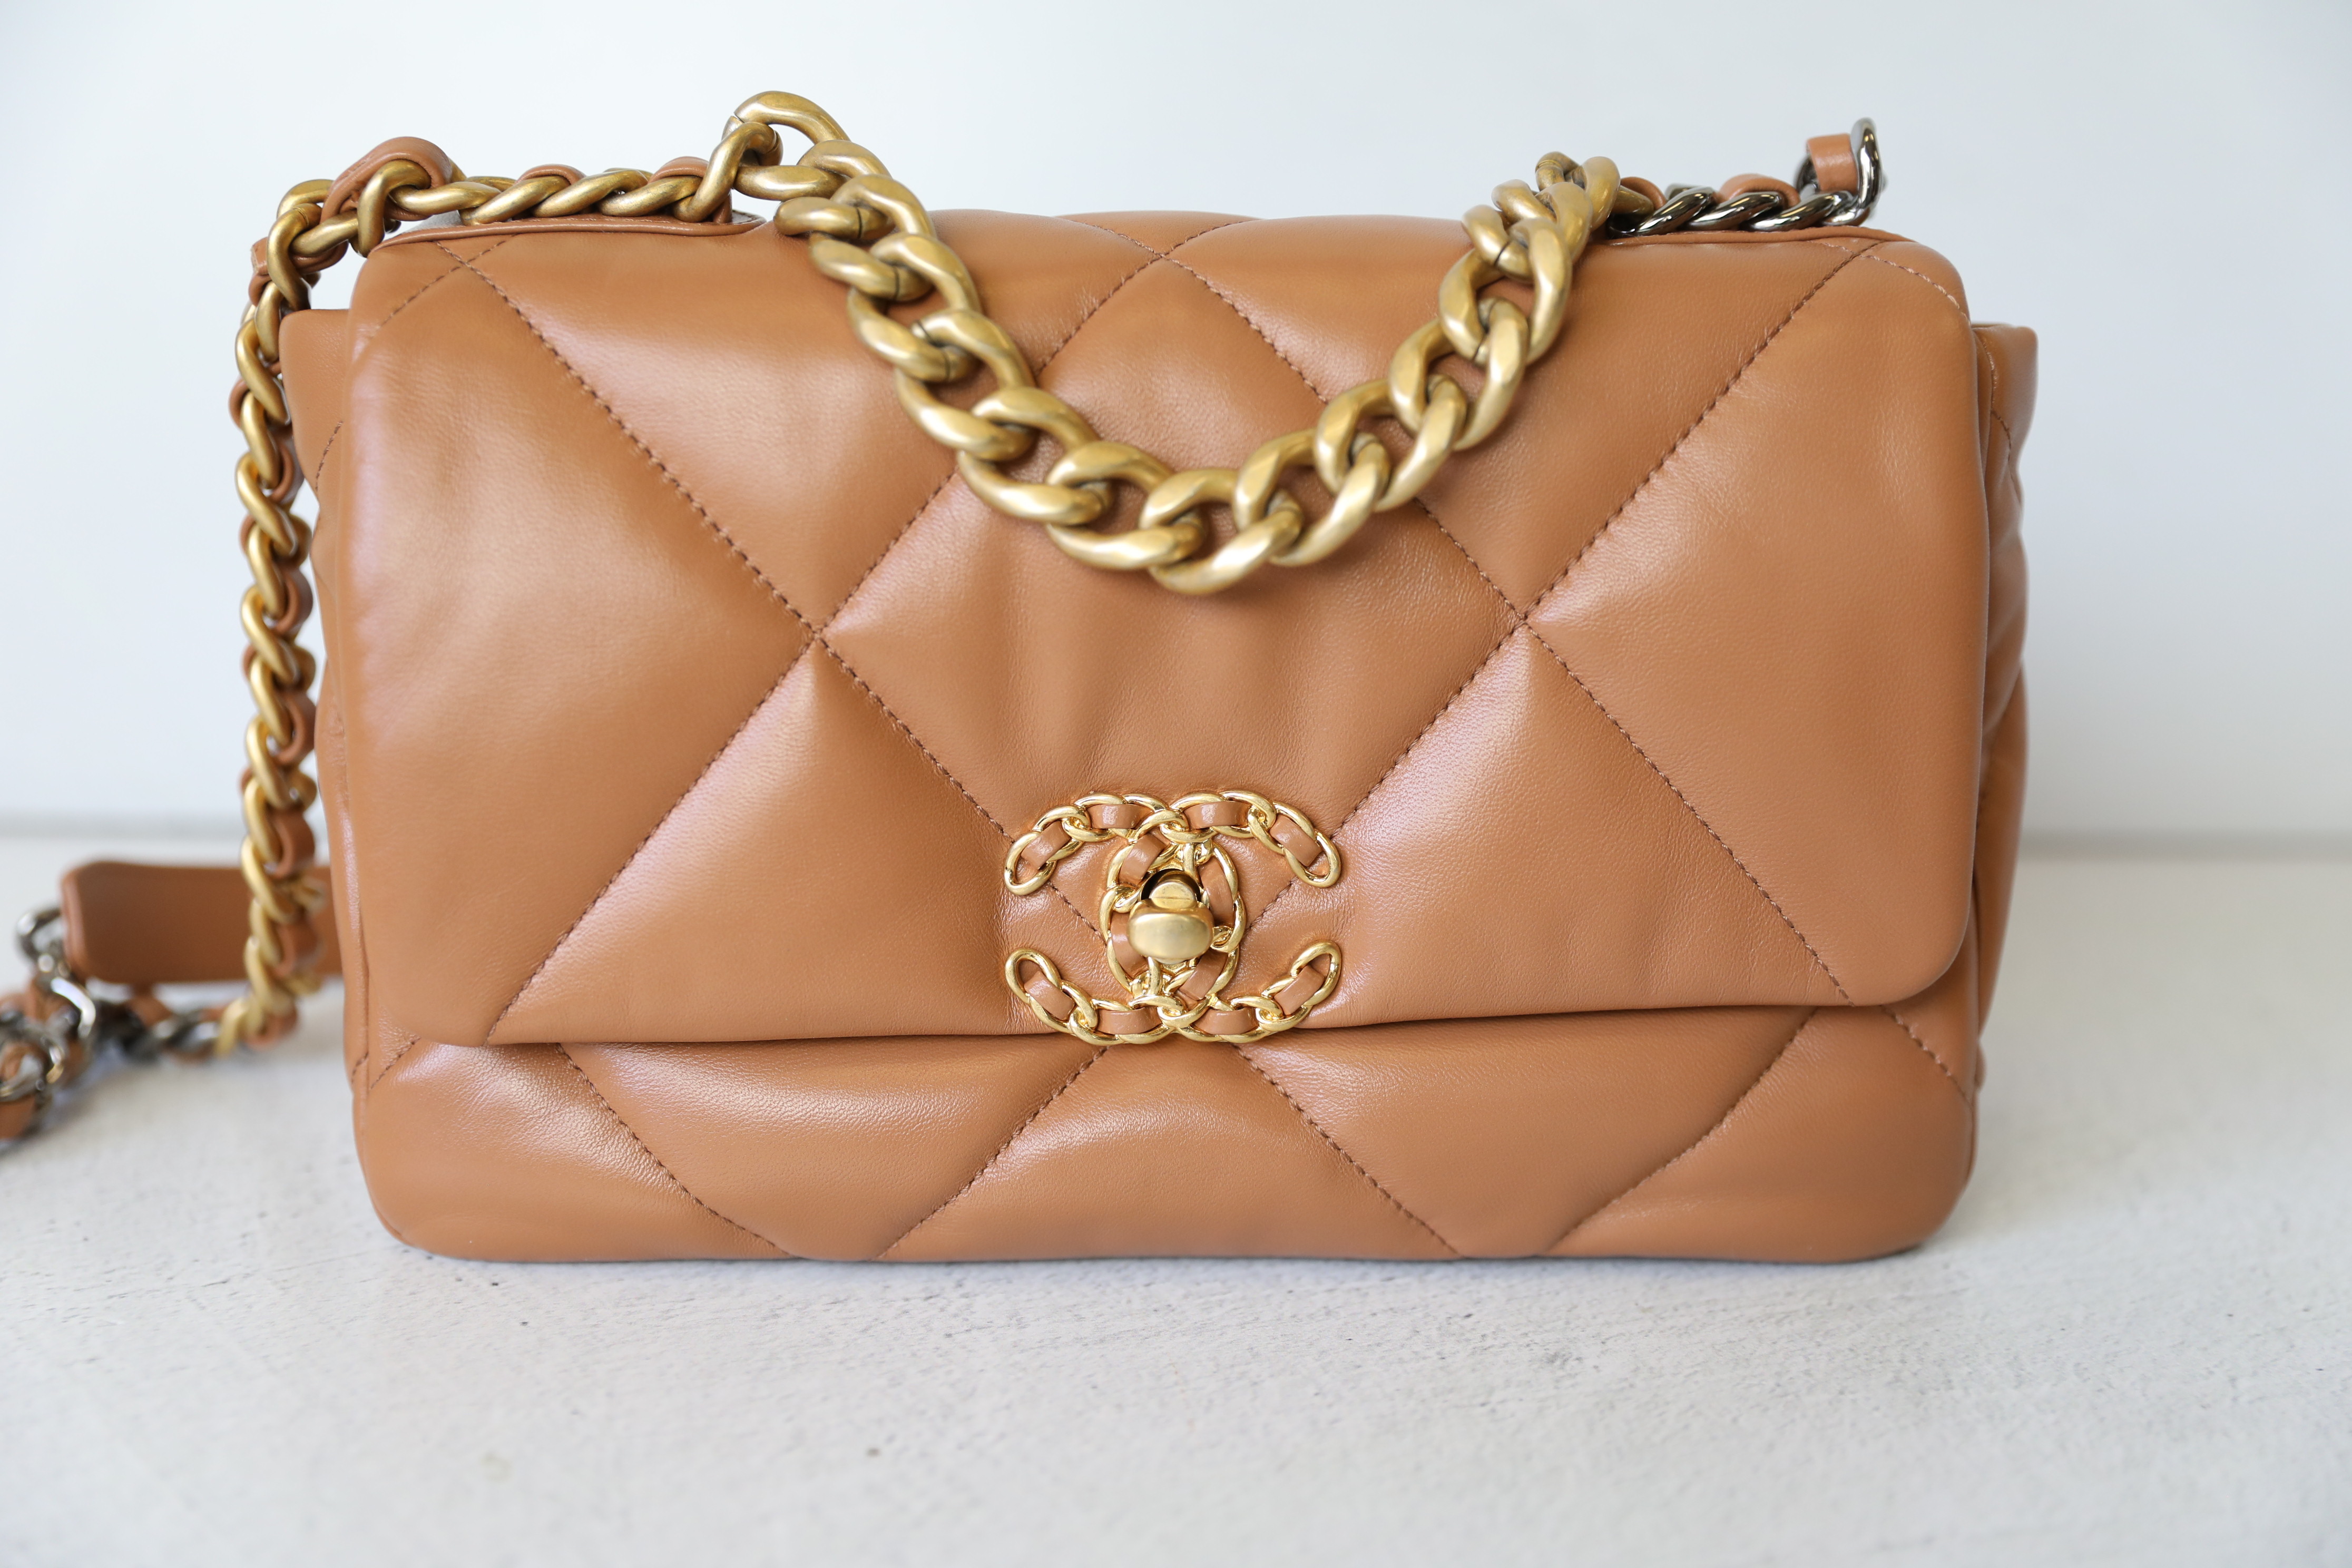 Chanel 19 Small, Caramel Brown Lambskin, Preowned in Dustbag